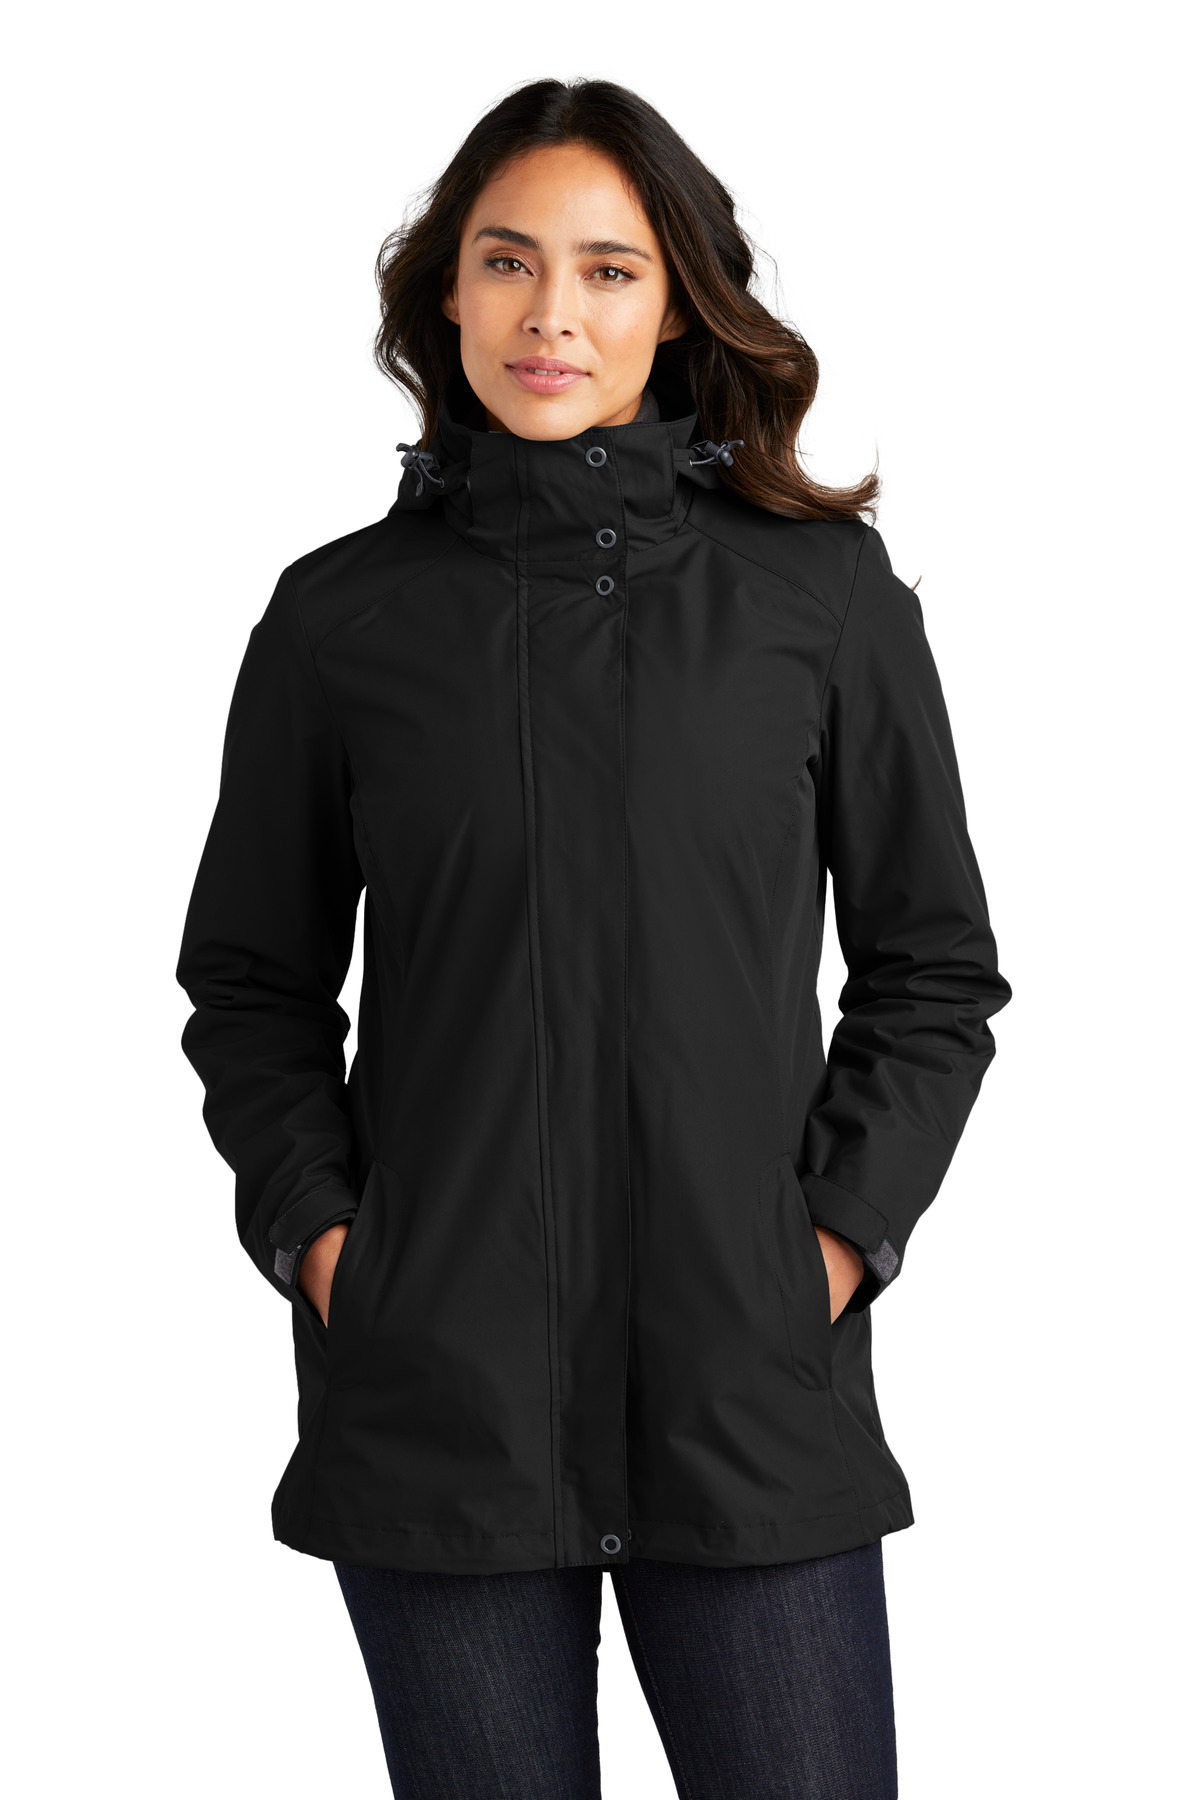 Port Authority Ladies All&#45;Weather 3&#45;in&#45;1 Jacket-Port Authority